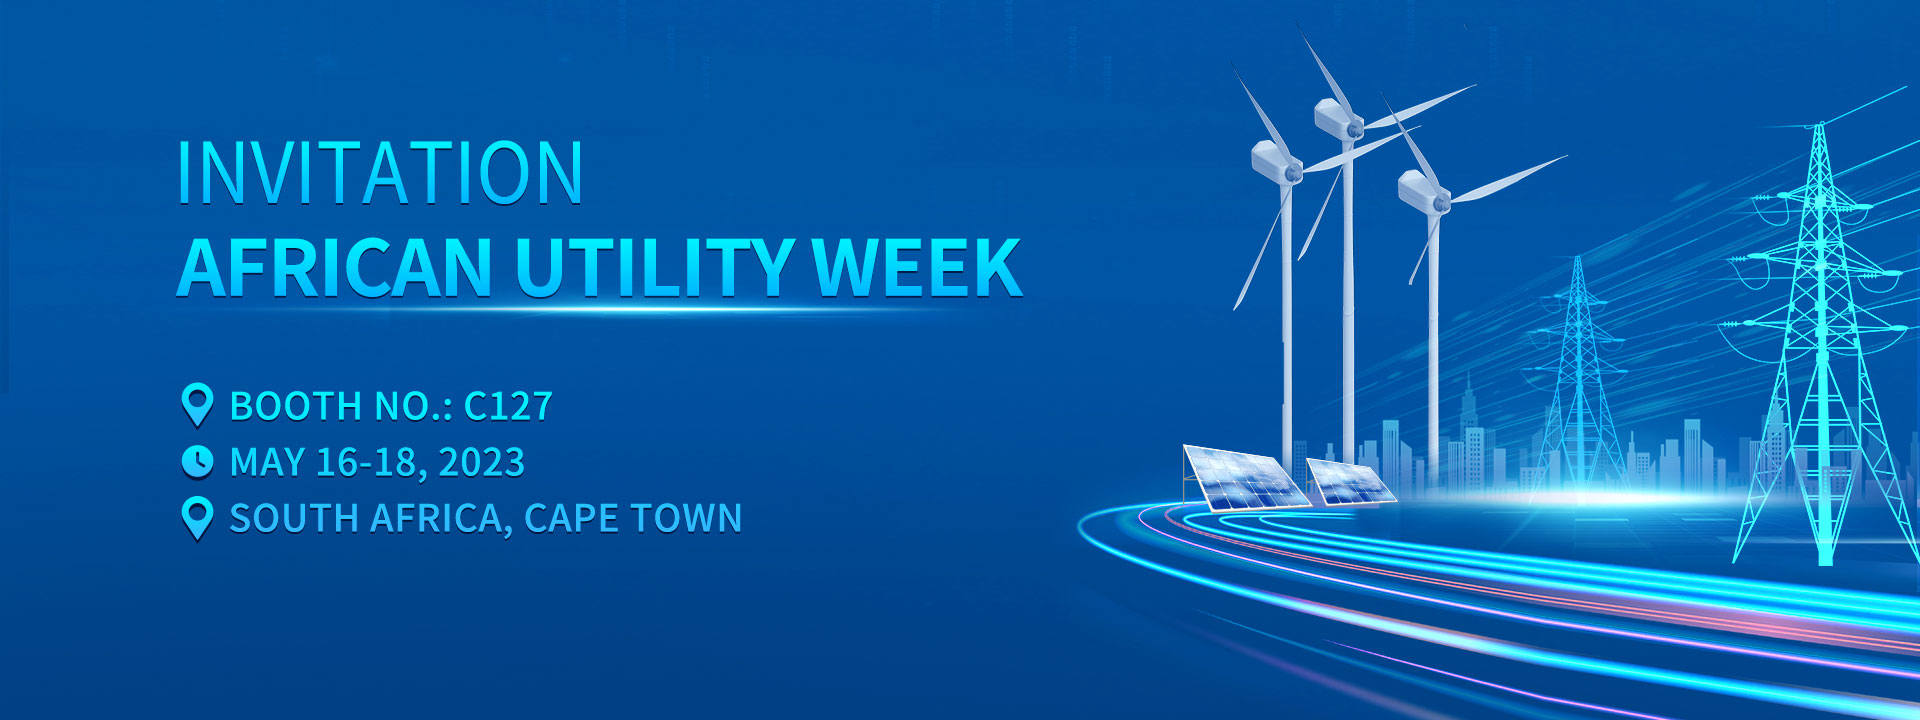 Invitation Letter of African Utility Week